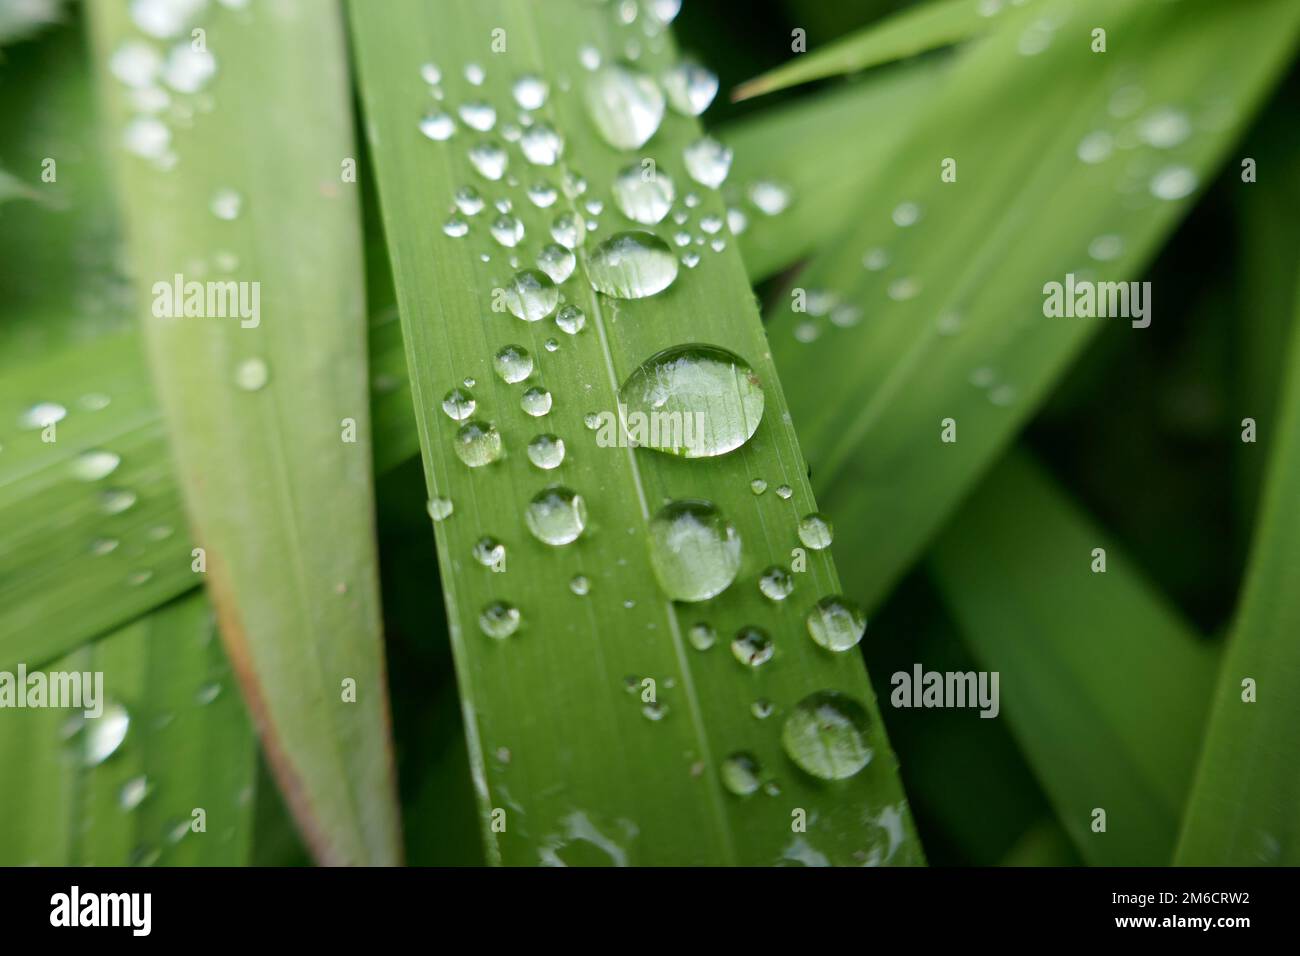 Water droplets on leaf surface close-up Stock Photo